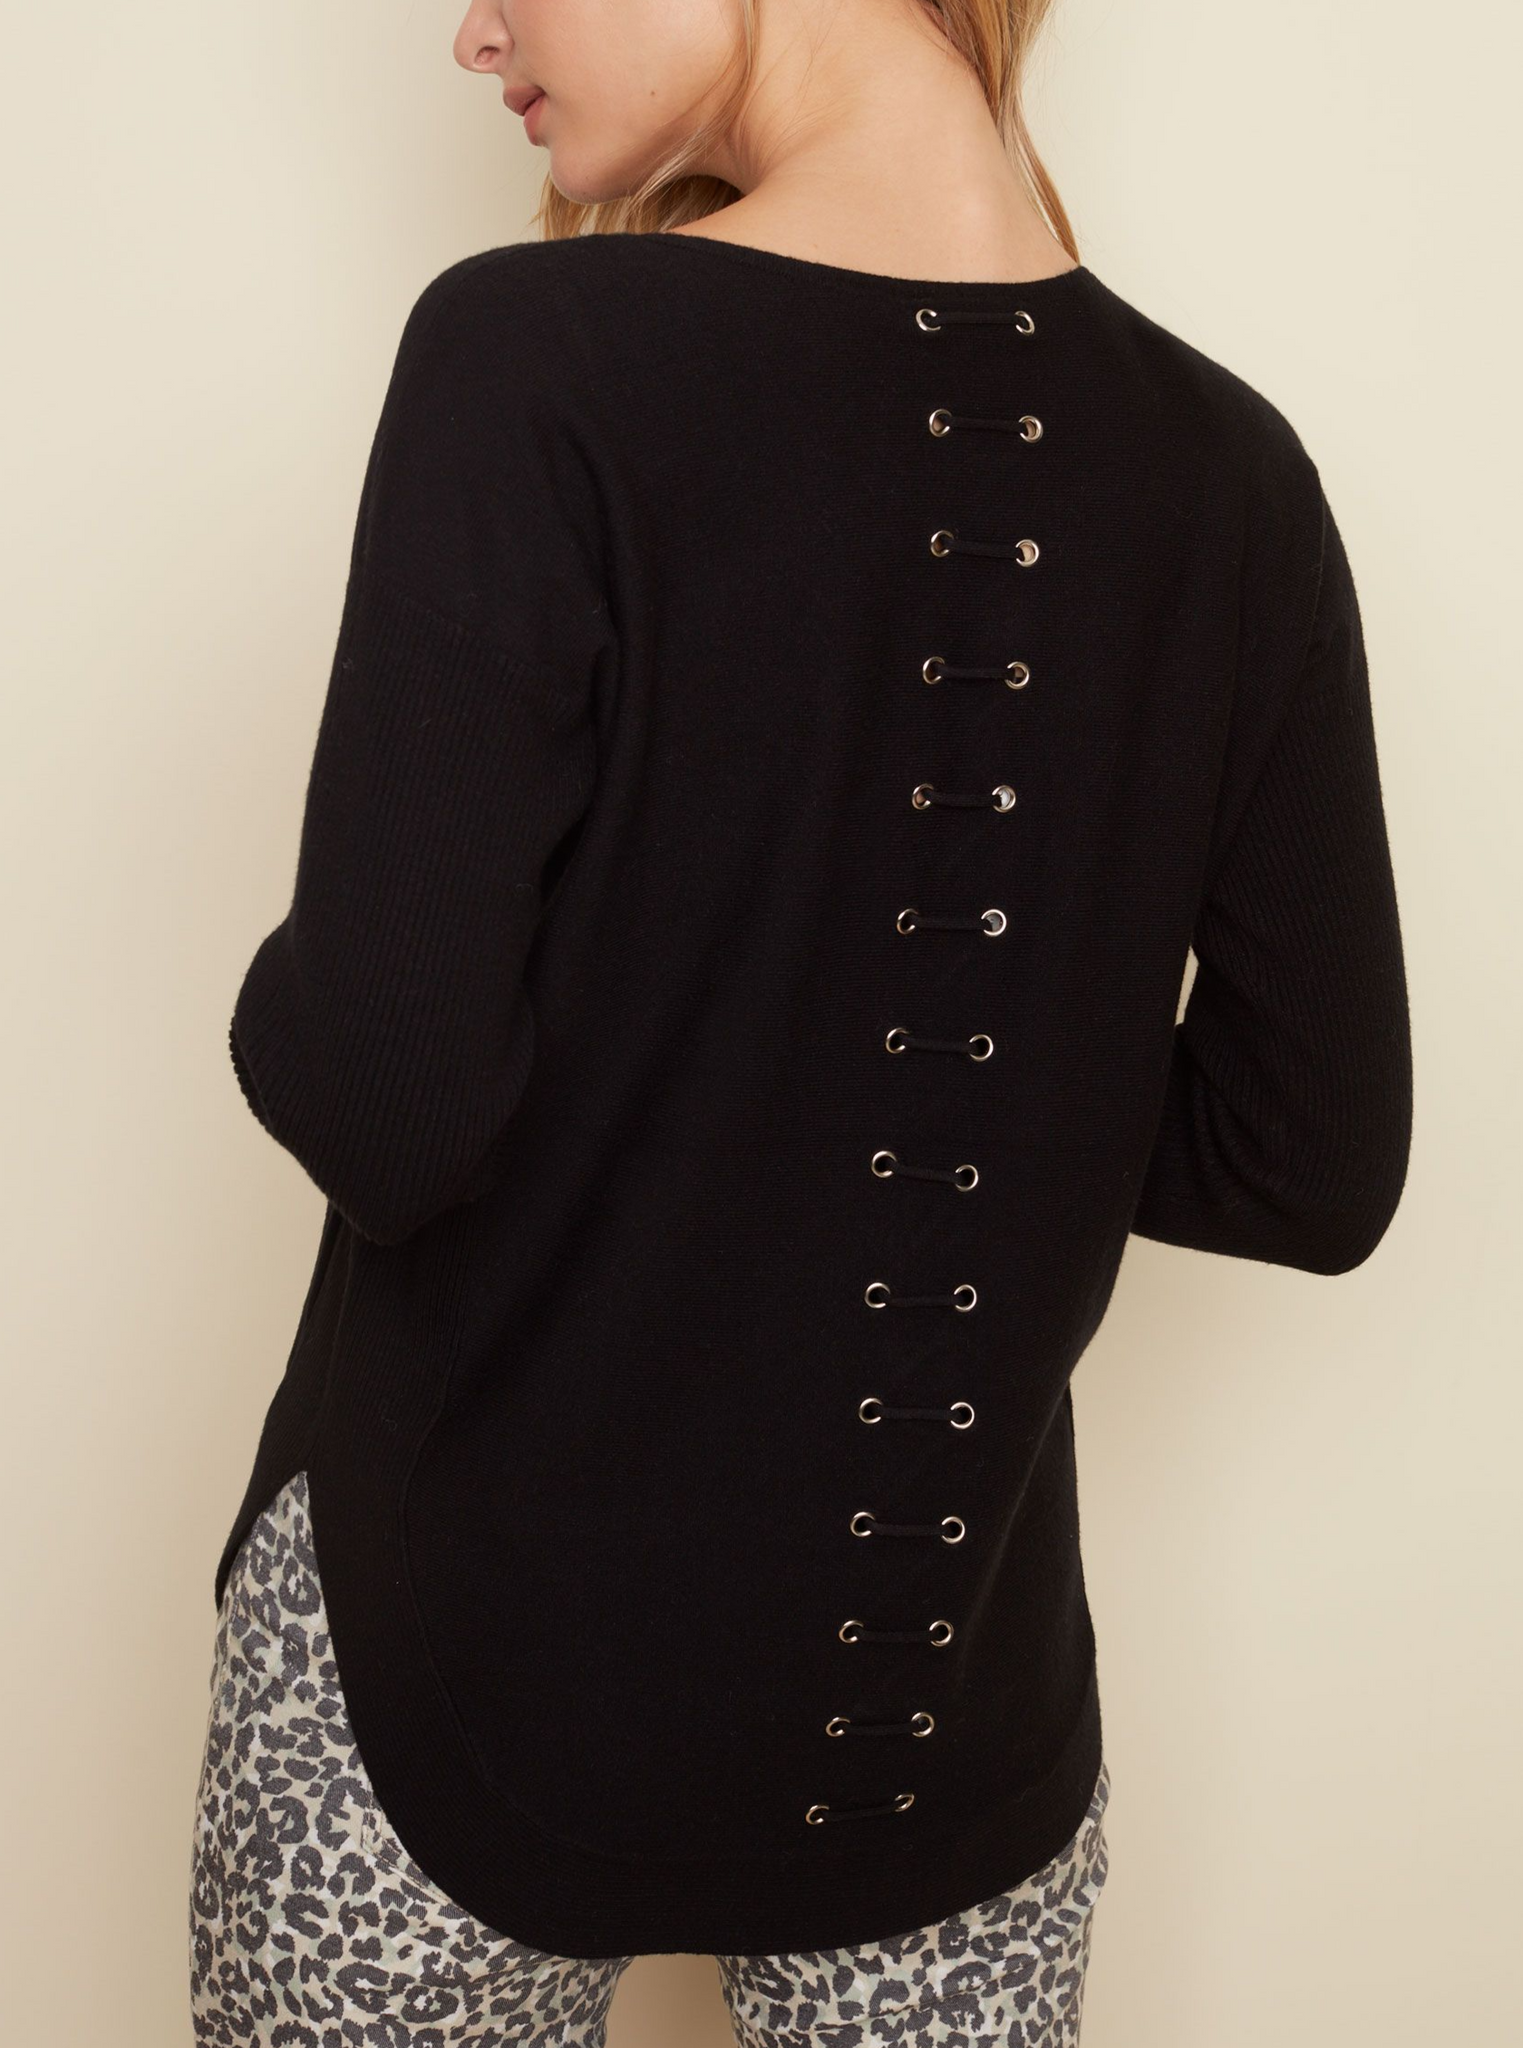 A soft and chic tunic-length sweater with front patch pockets and rounded hem make this sweater stand out, but the real showstopper is the lace-up eyelet detail in the back.  Available in Black and Ginger and Amber.  Long rib sleeves Two front pockets Back lace-up eyelet detail Rounded hem 51% Rayon  27% Polyester 22% Nylon